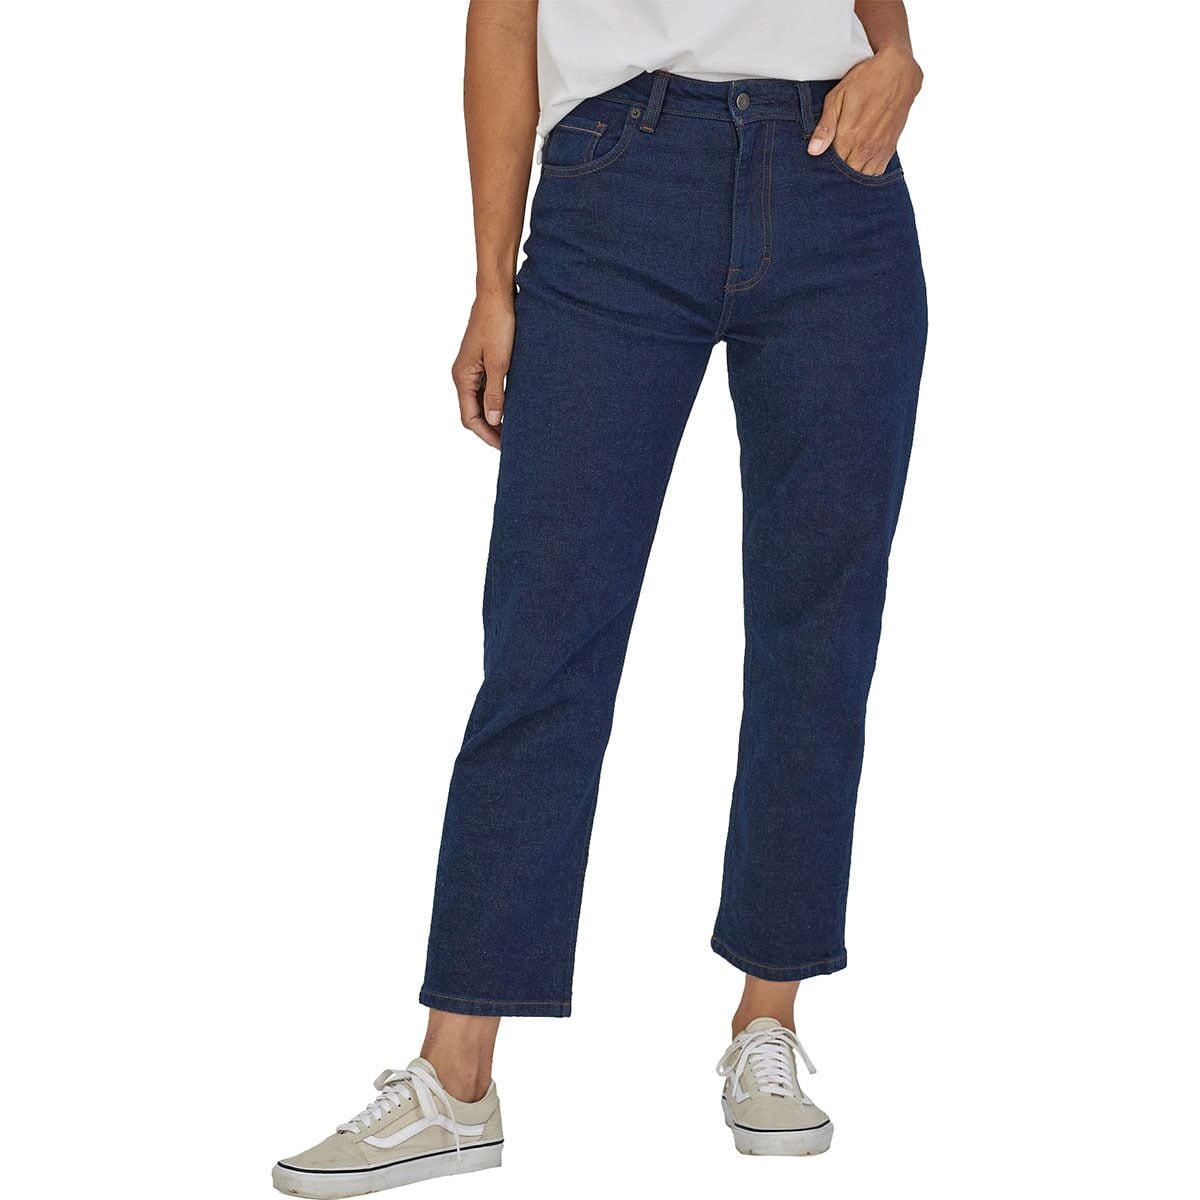 Patagonia Straight Fit Jean - Women's